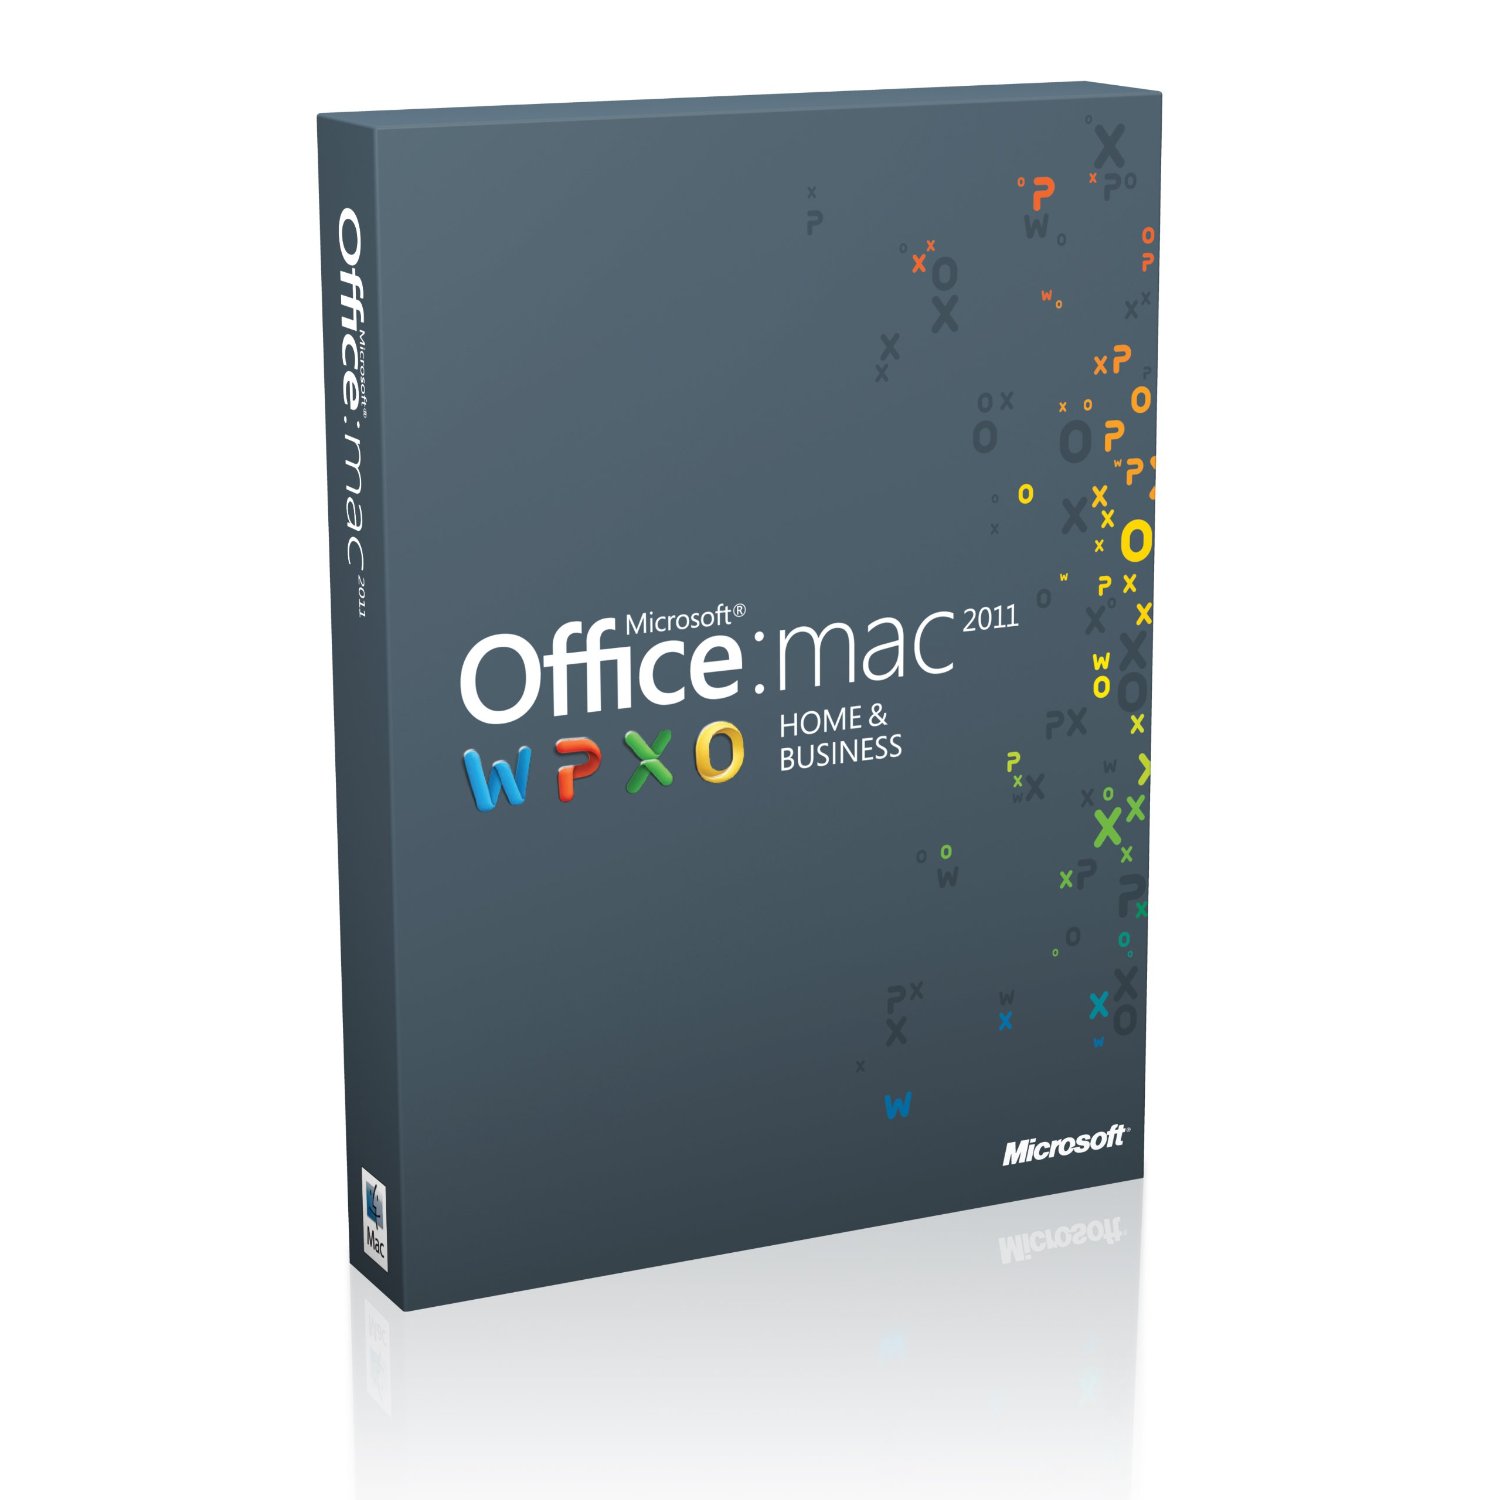 Microsoft office suite 2011 for mac free download